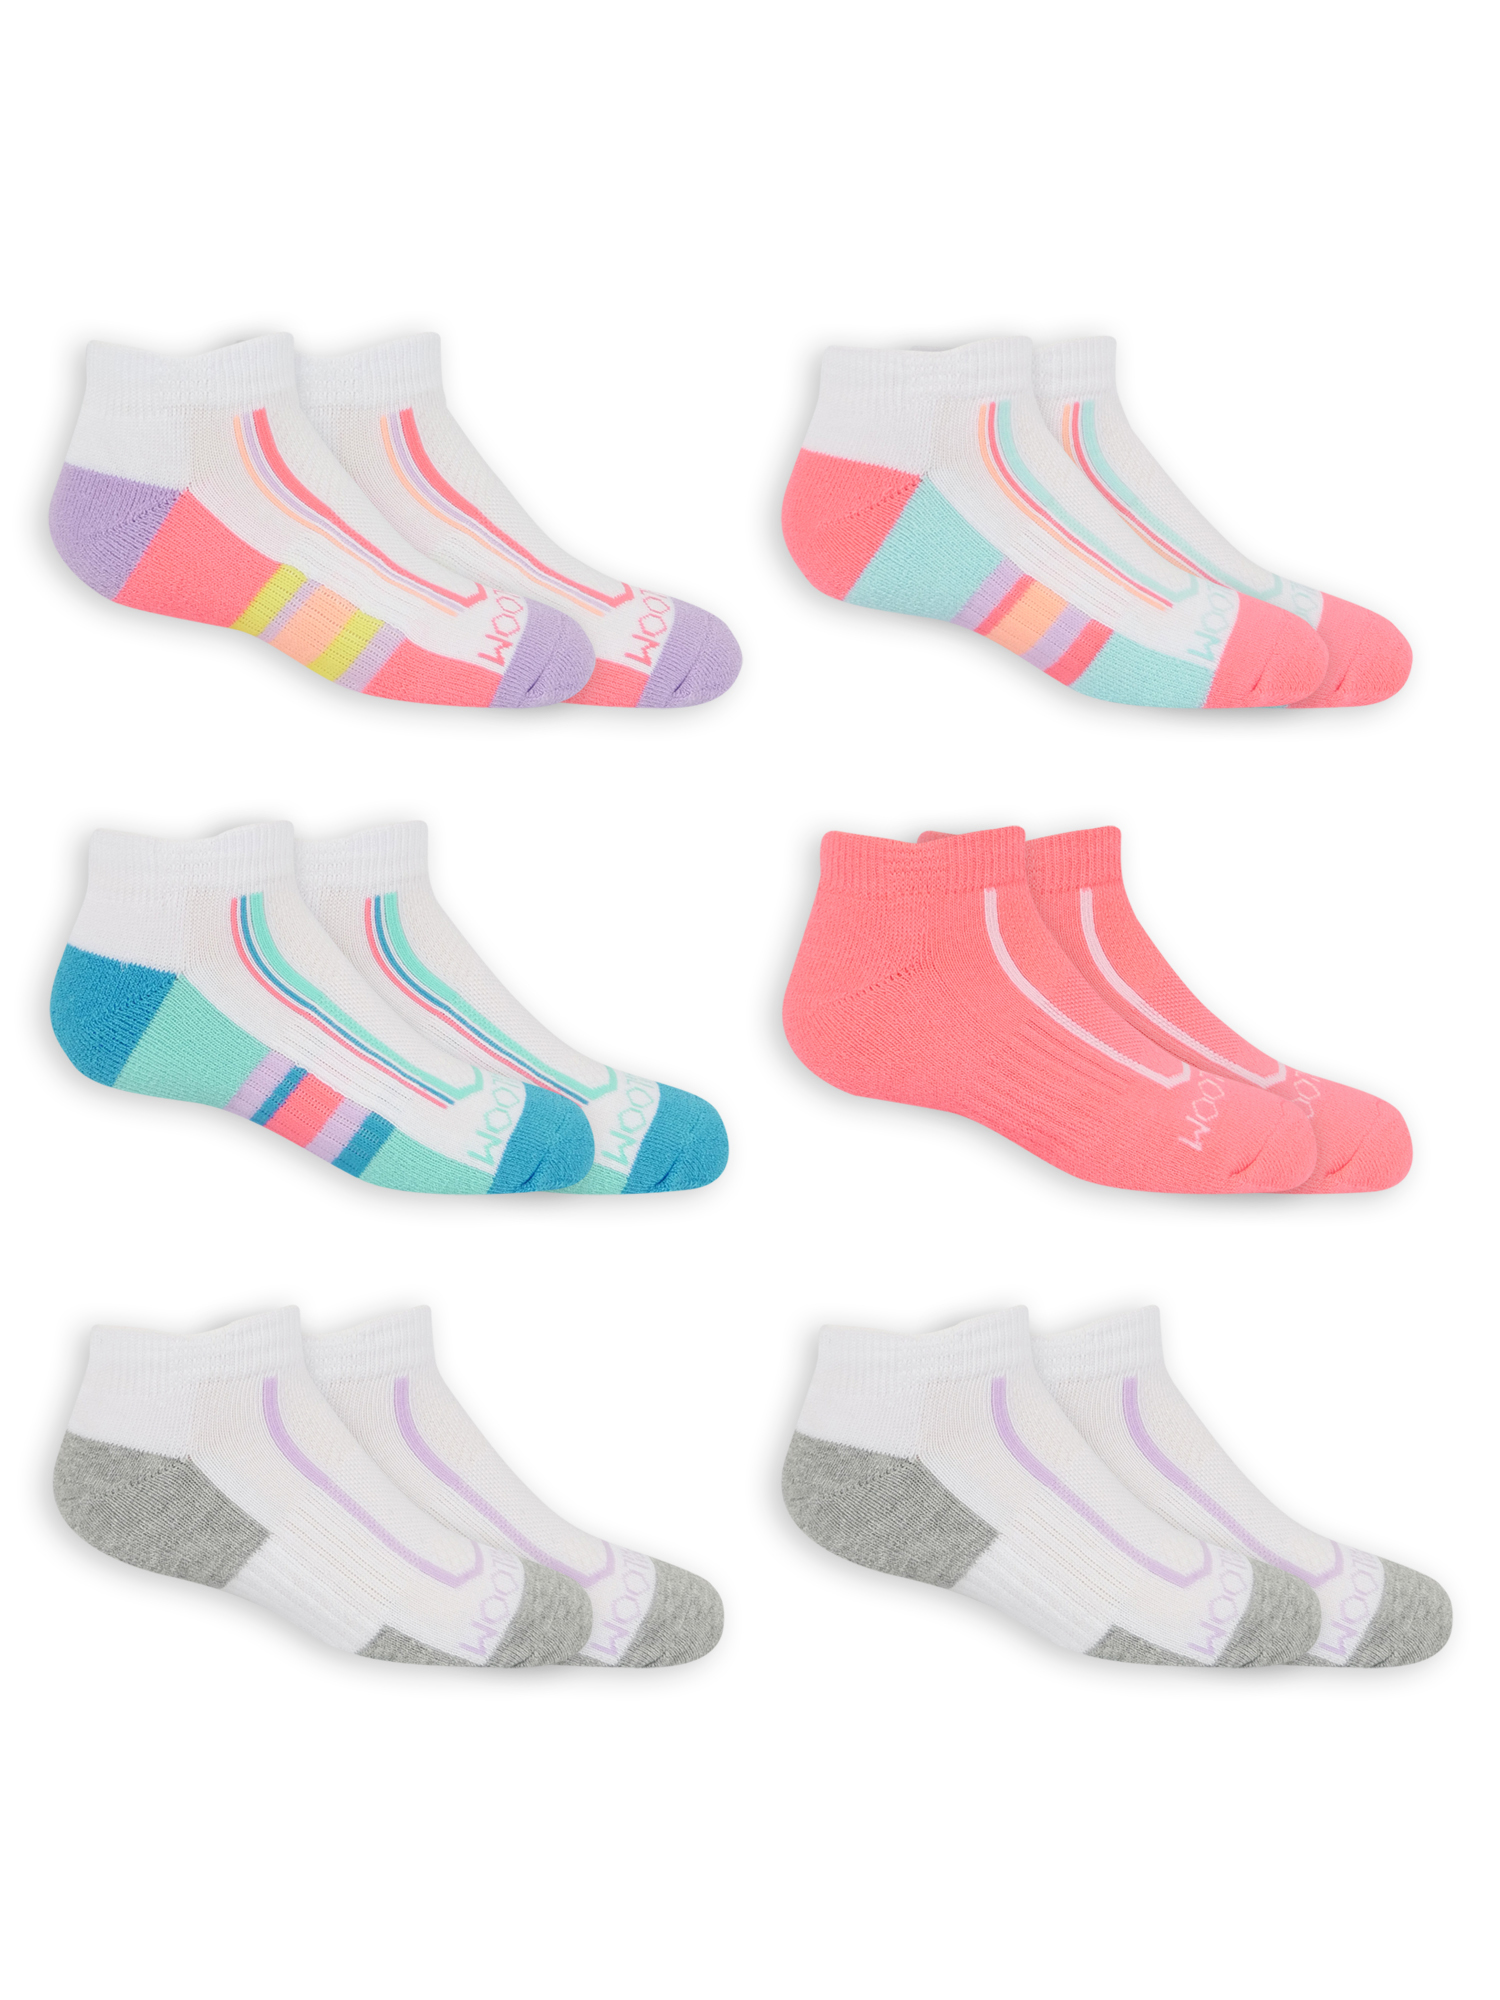 Fruit of the Loom Girls Athletic Low Cut Socks 12-Pack, Sizes S-L - image 5 of 5